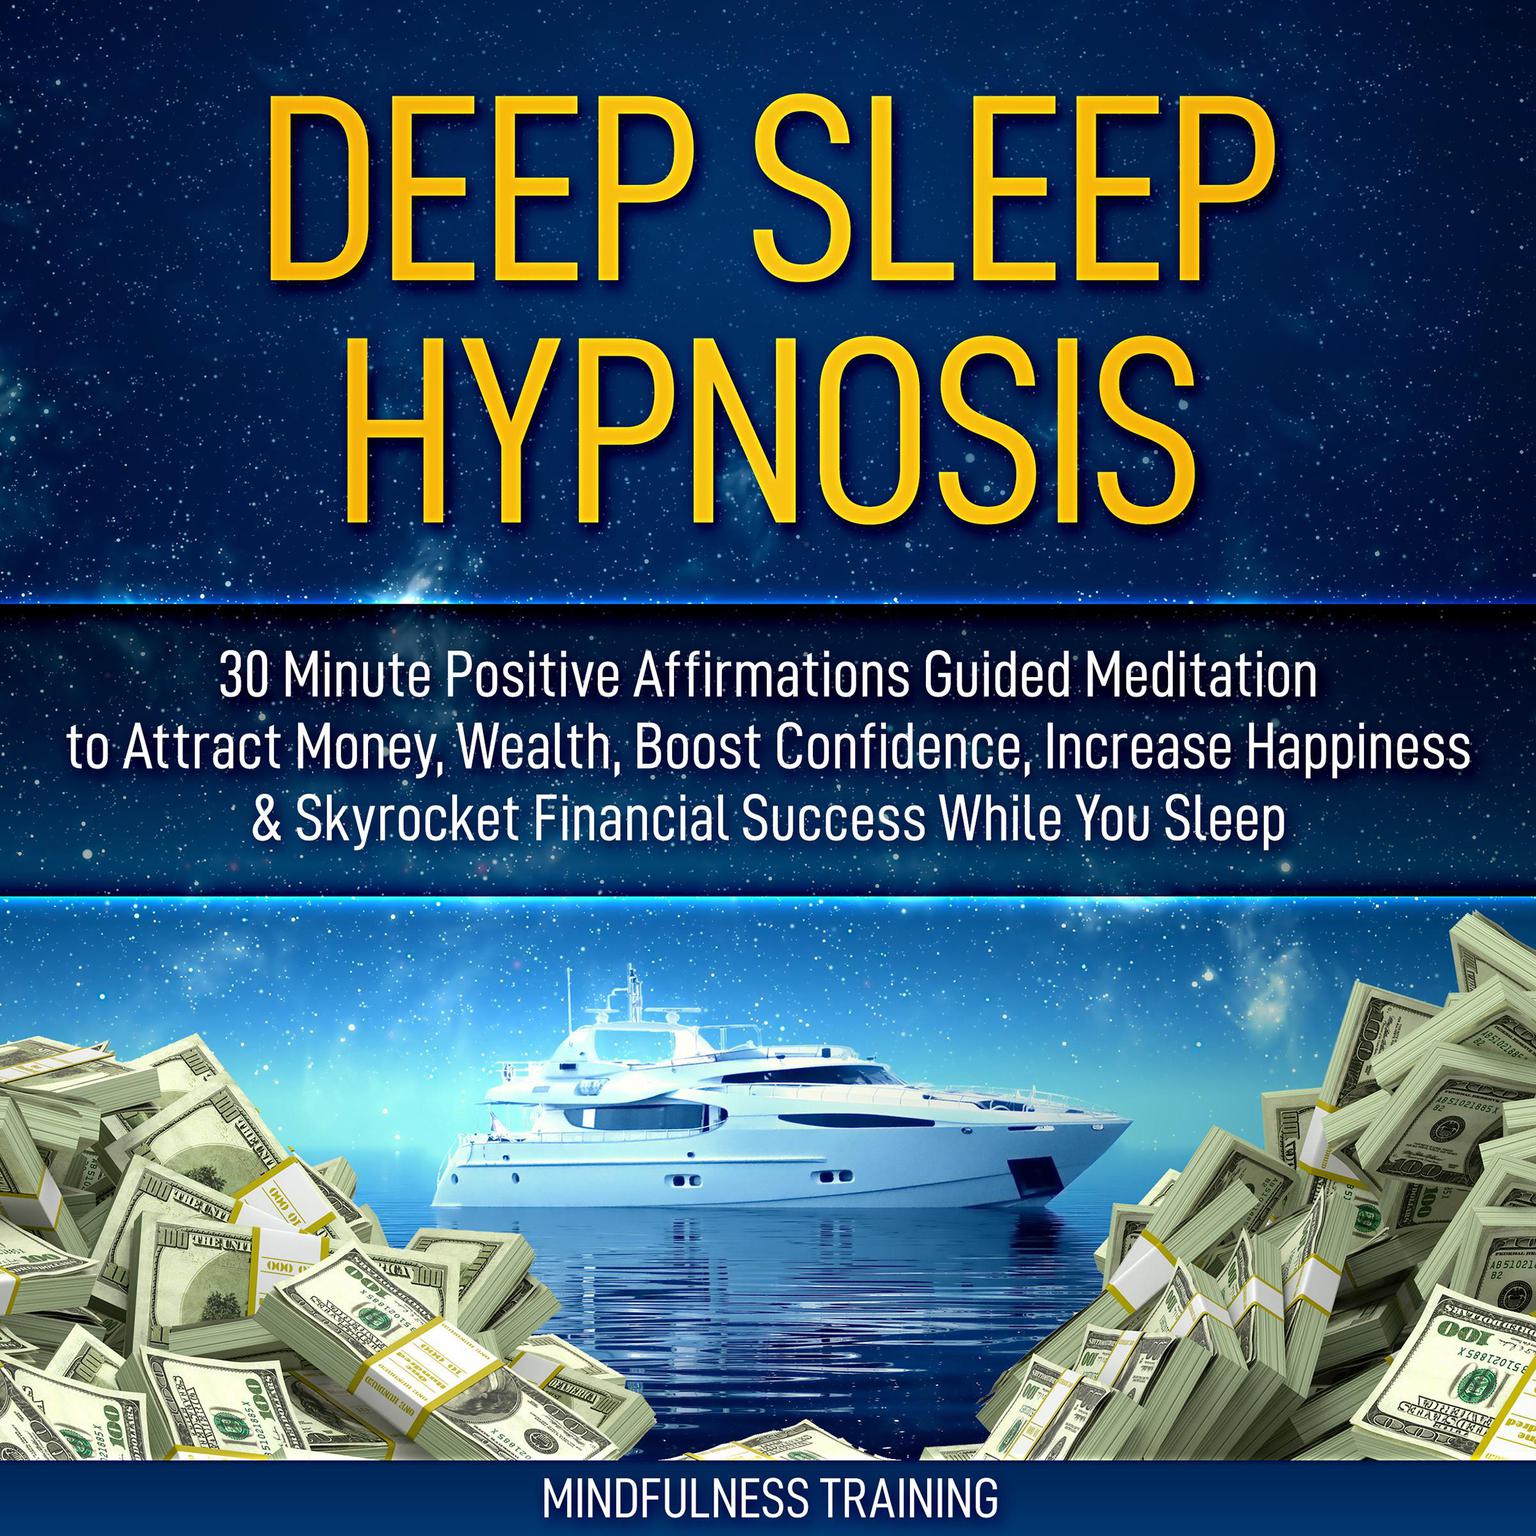 Deep Sleep Hypnosis: 30 Minute Positive Affirmations Guided Meditation to Attract Money, Wealth, Boost Confidence, Increase Happiness & Skyrocket Financial Success While You Sleep (Guided Imagery, Law of Attraction Visualizations, & Relaxation Techniques) Audiobook, by Mindfulness Training